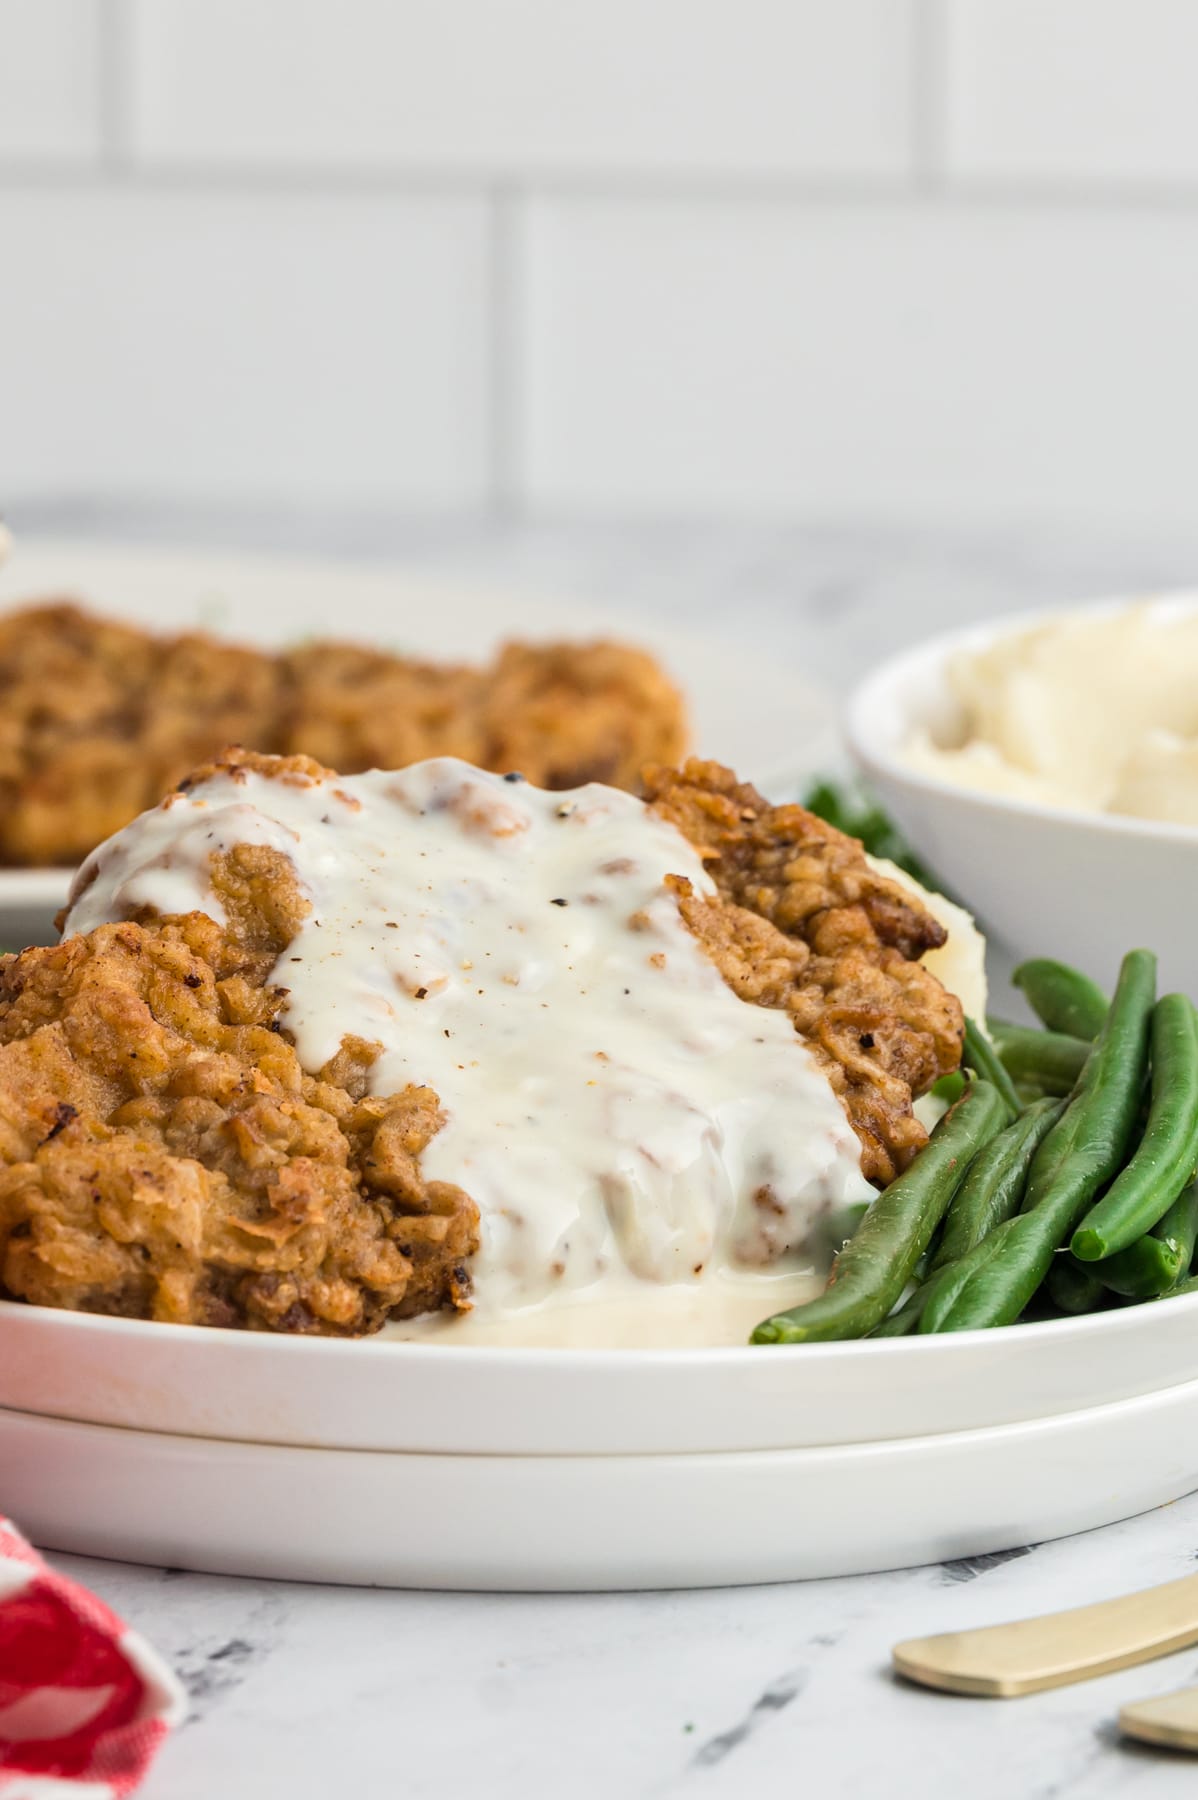 Chicken fried steak with gravy on a plate with green beans